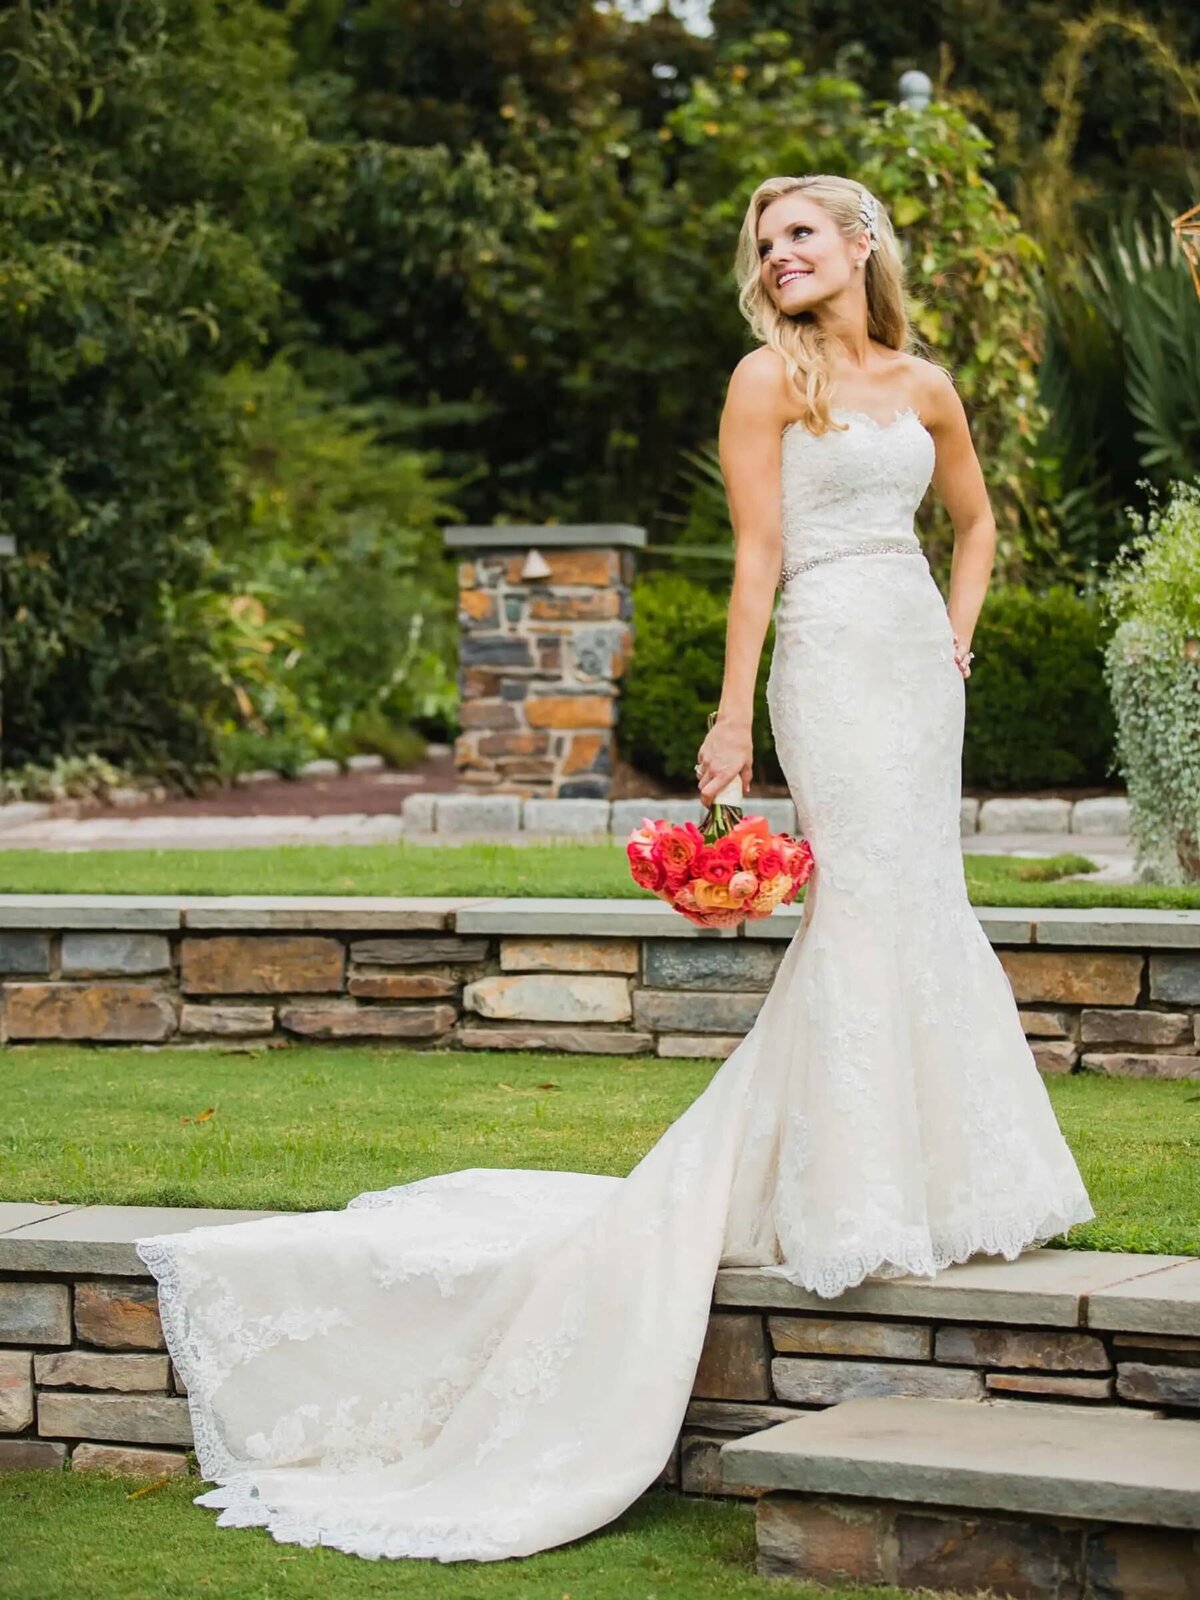 A bride standing on a small ledge looking over her shoulder